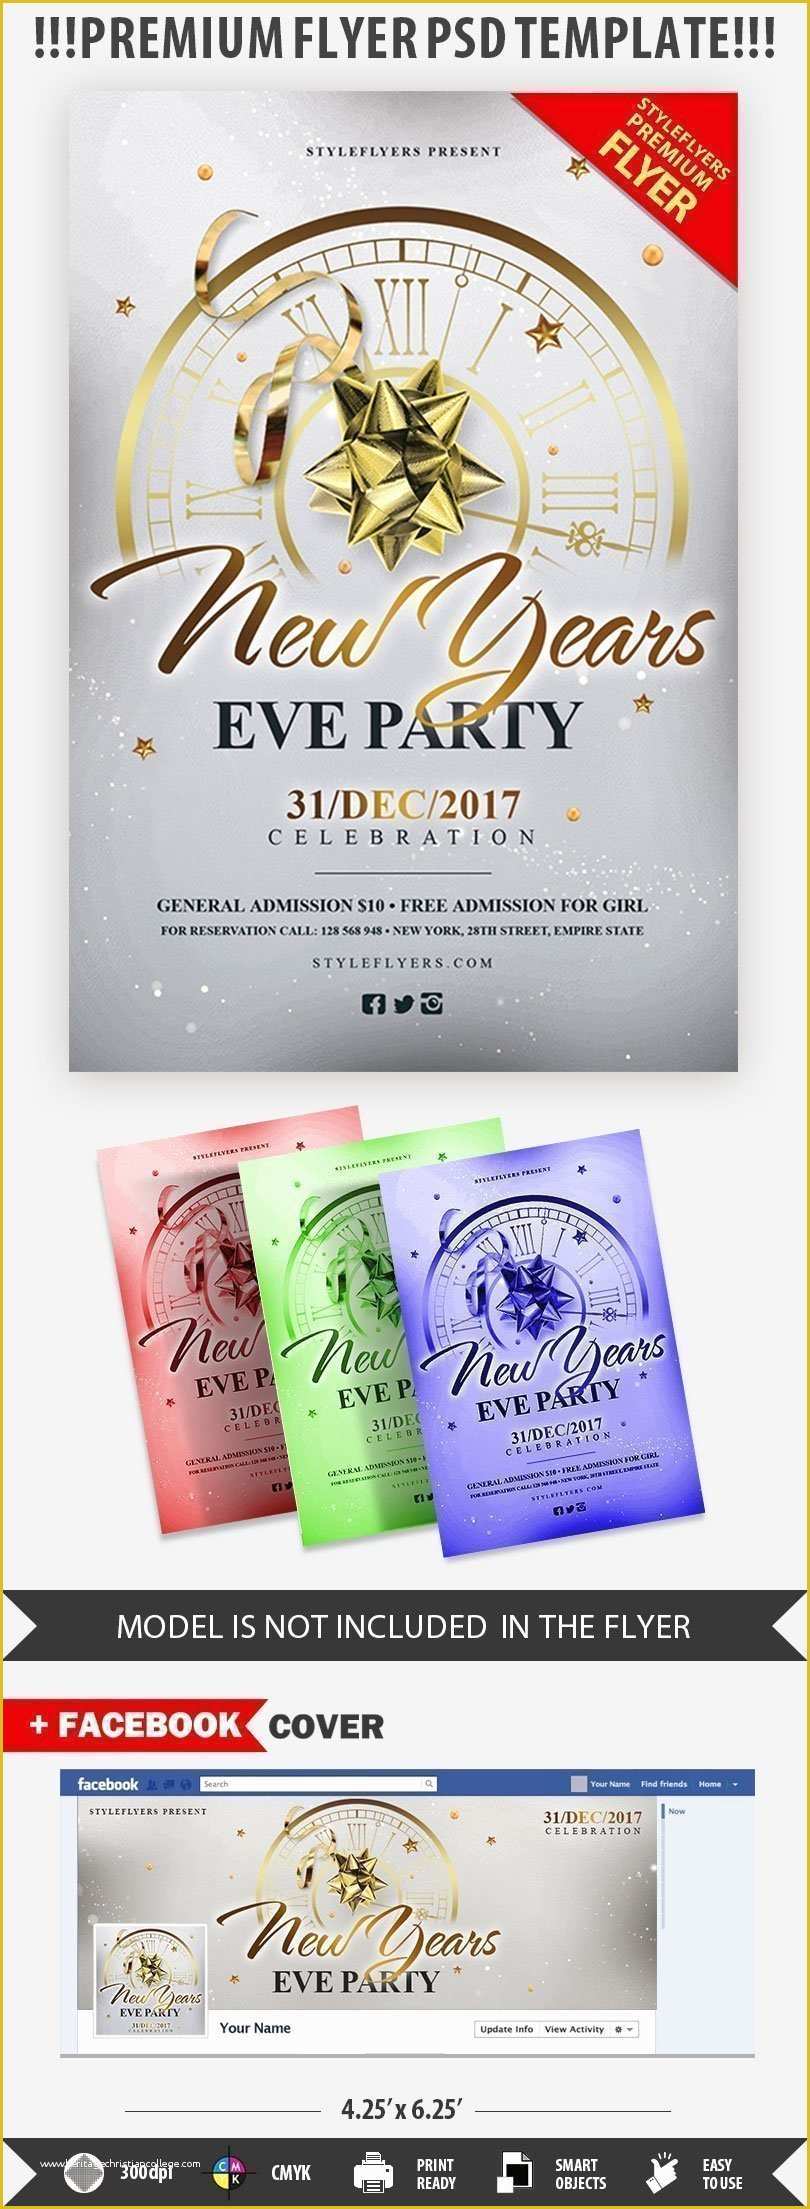 Free New Years Eve Flyer Template Of New Year’s Eve Party Psd Flyer Template Styleflyers